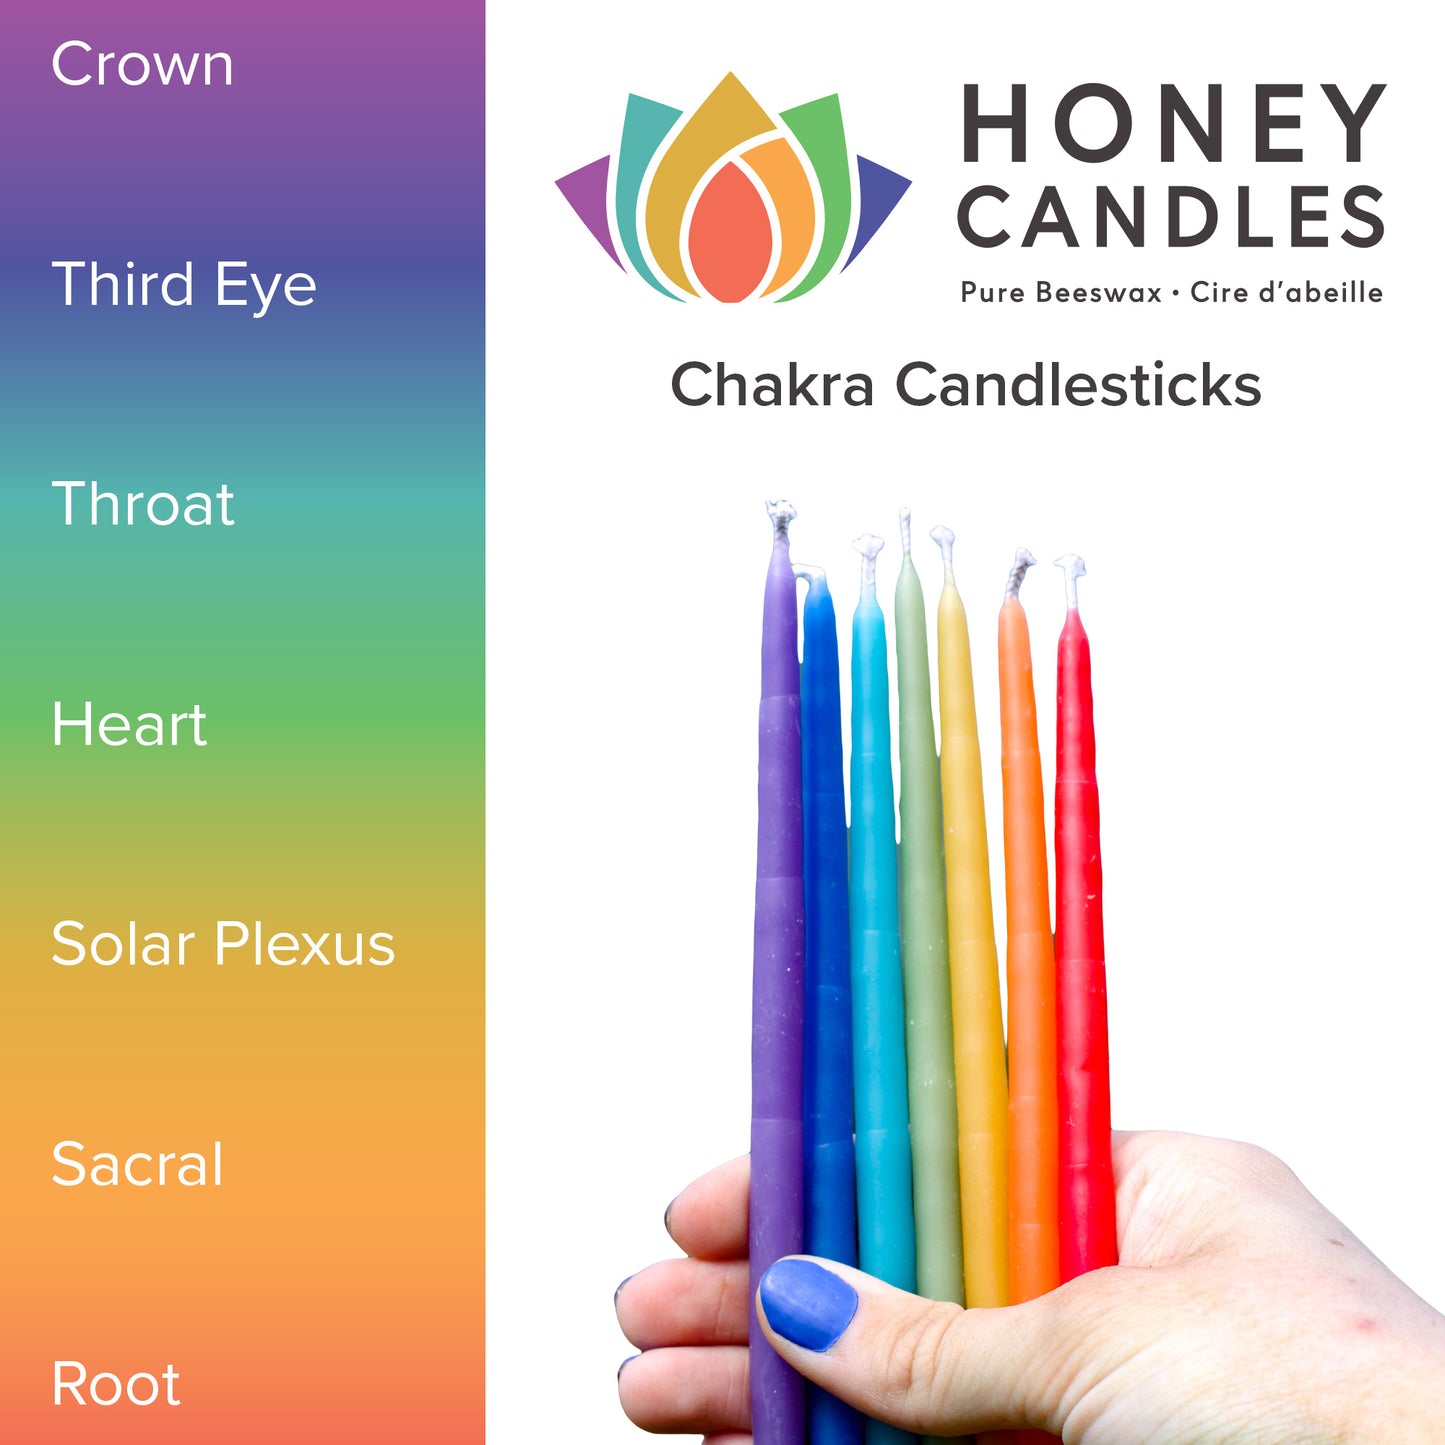 42 Pack of Beeswax Chakra Candlesticks